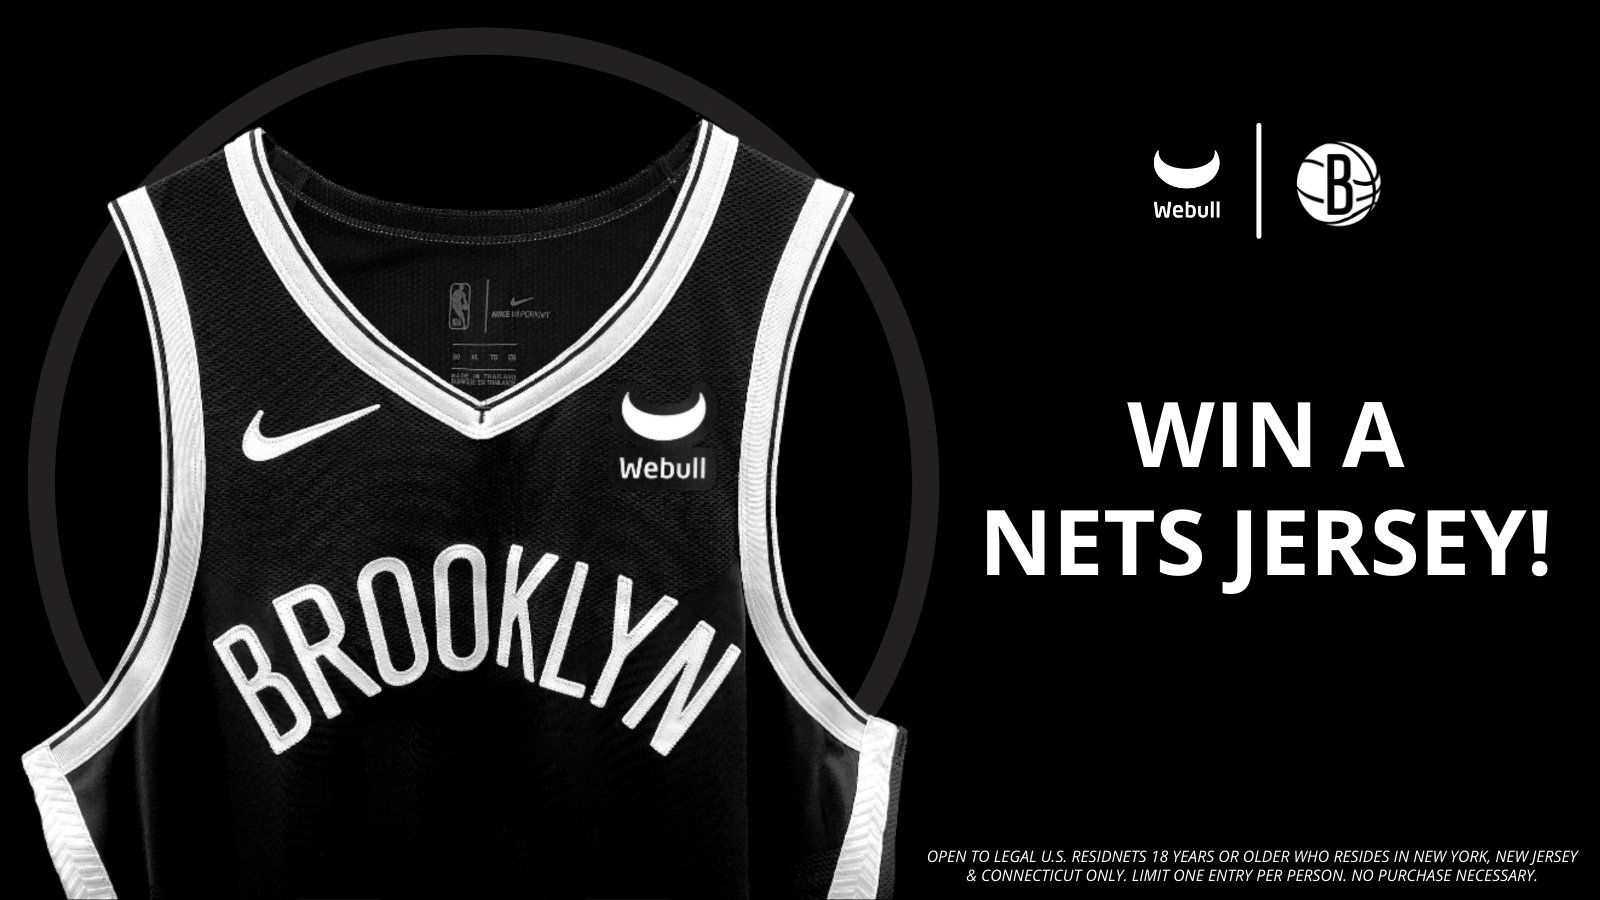 Nets sign monster jersey patch deal with WeBull, the online